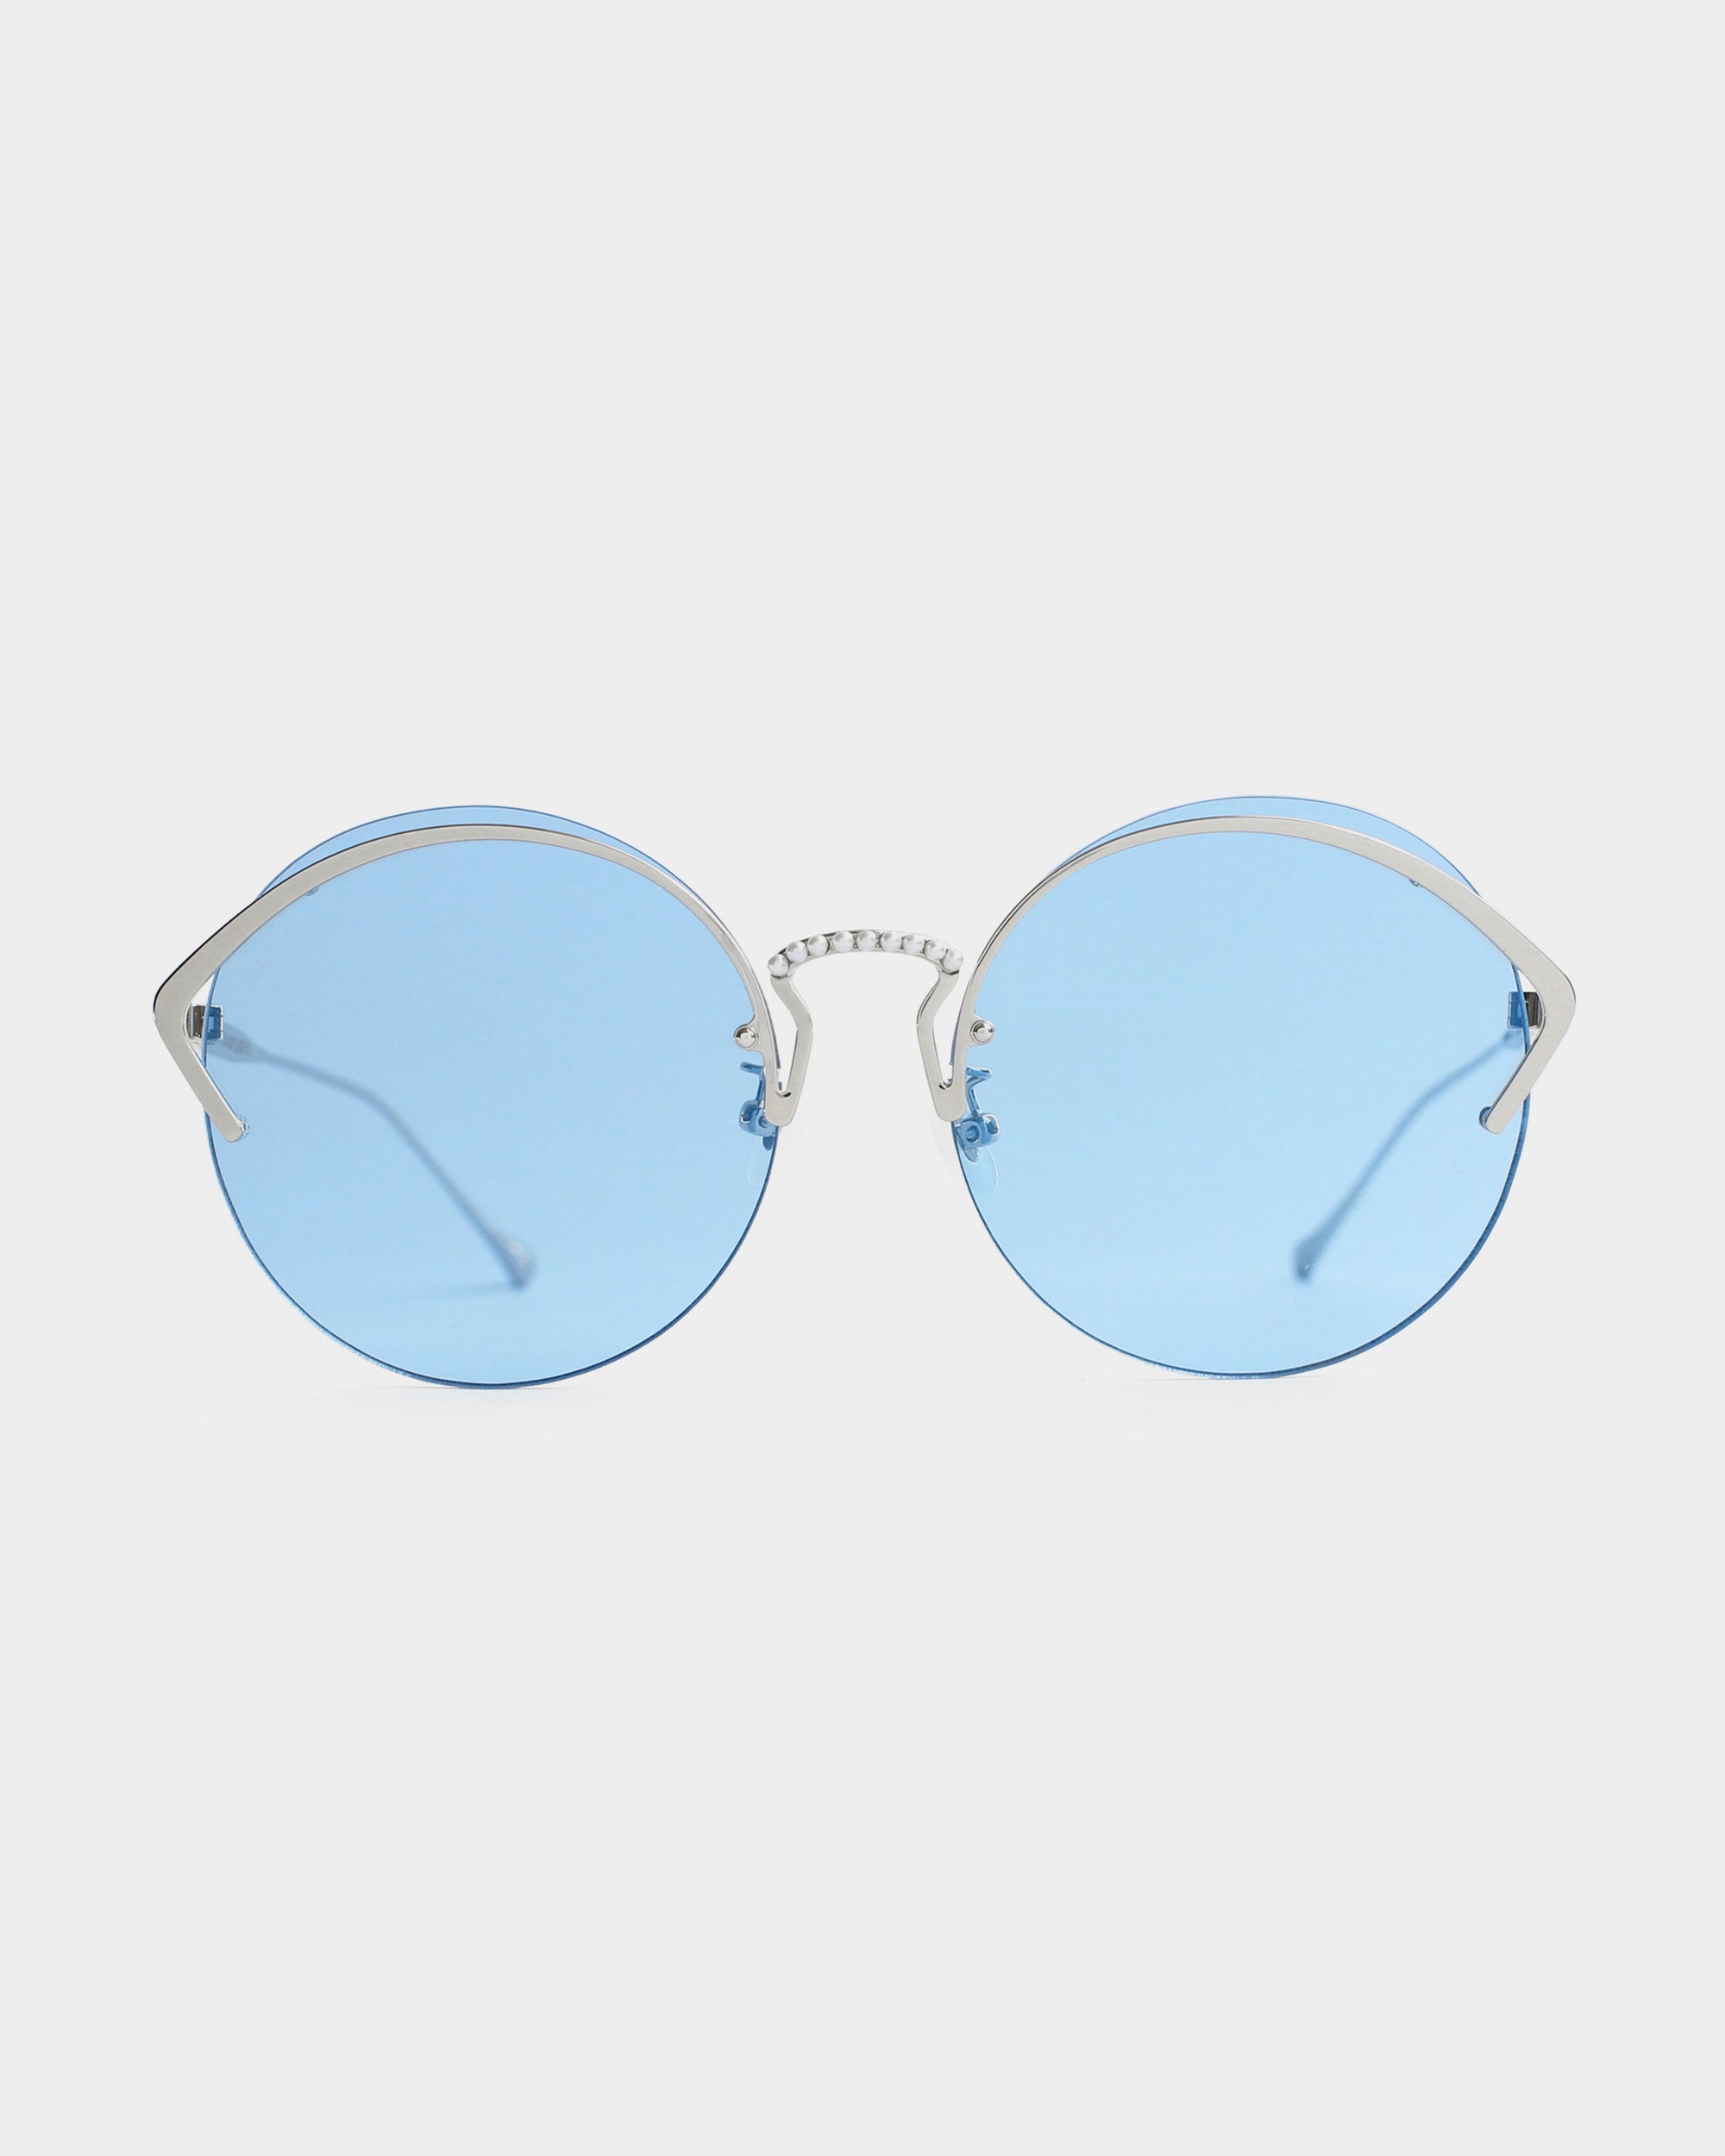 Round sunglasses with thin stainless steel frames and light blue Nylon lenses, set against a plain white background. The bridge features a subtle textured design, offering both style and UV protection. These are the Margarita sunglasses by For Art's Sake®.